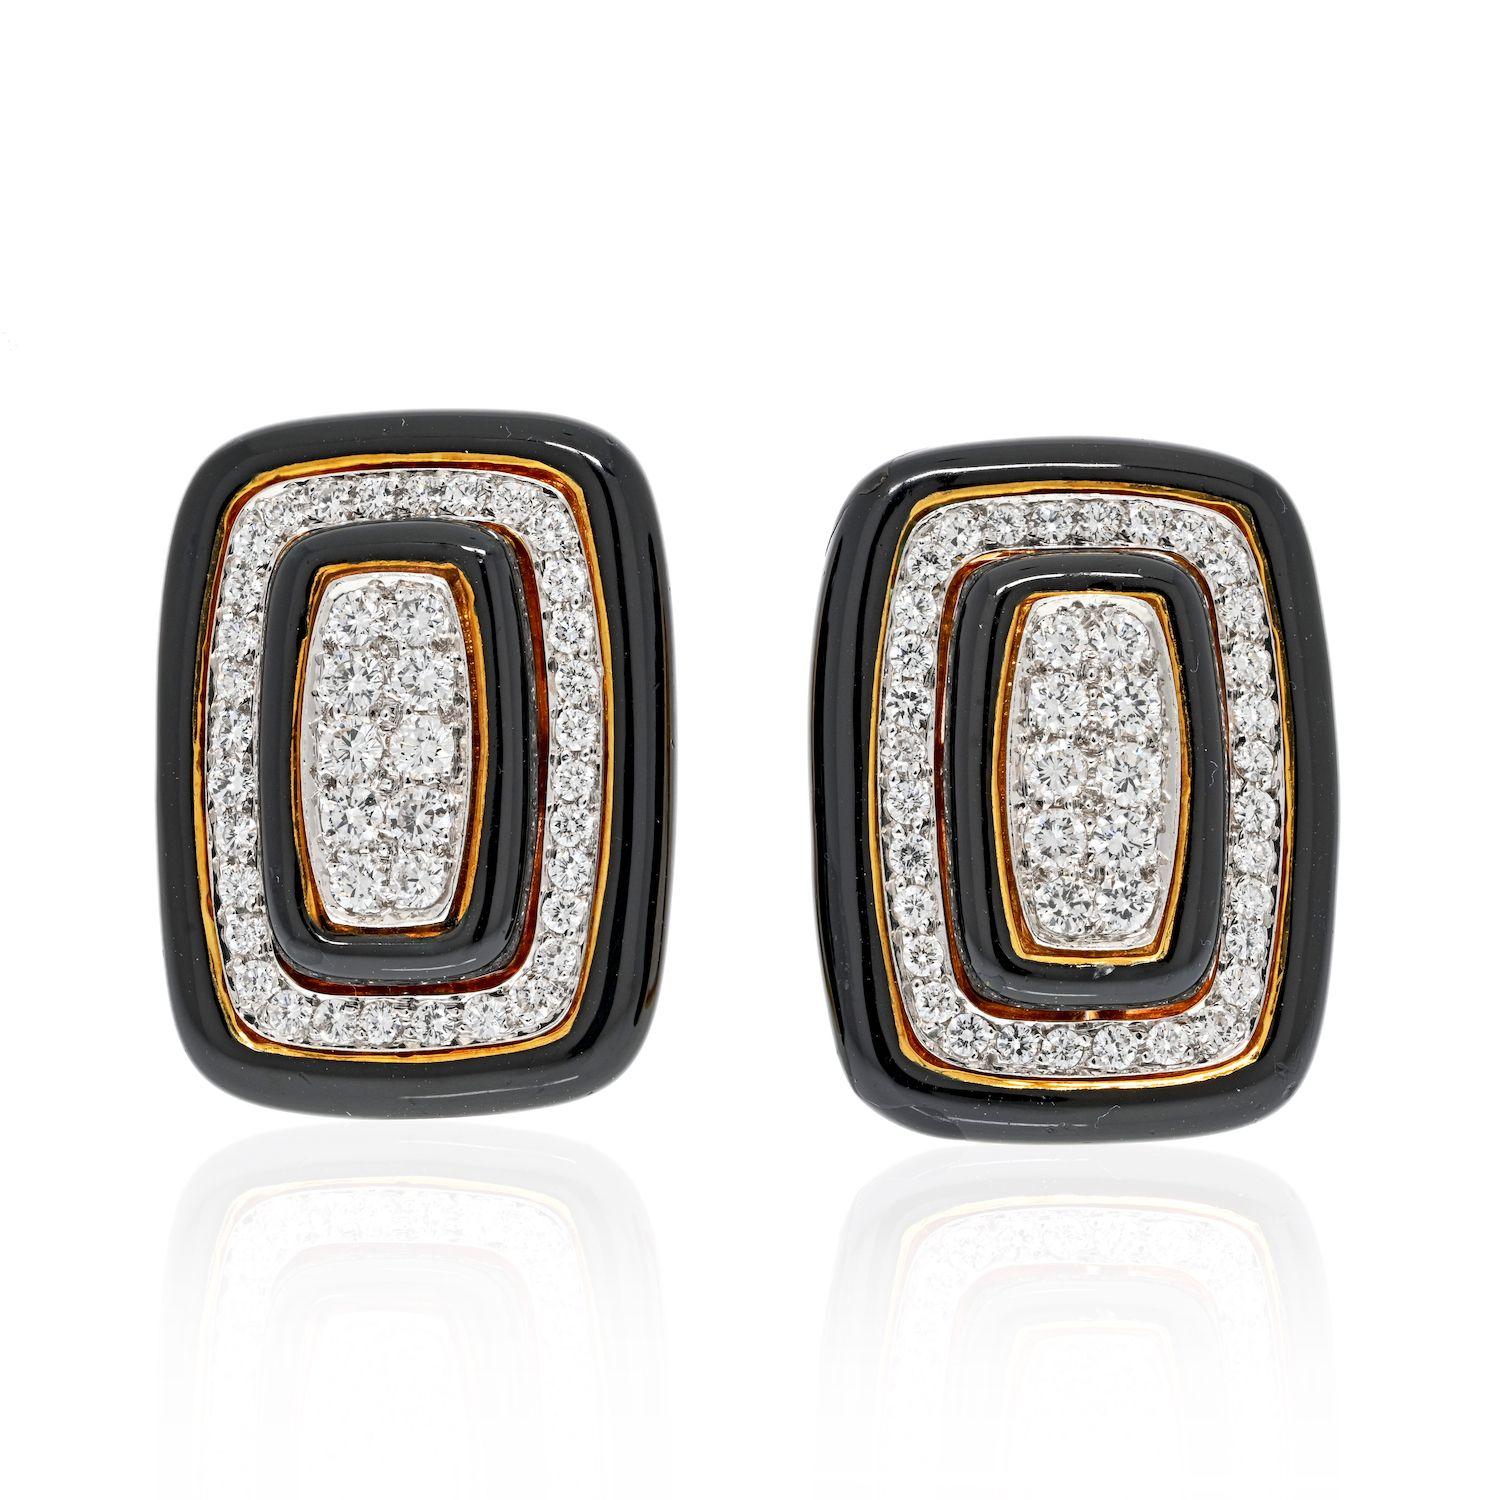 A classic pair of earrings always goes a long way especially when it's made by David Webb. Elegant layout with diamonds and black enamel. Clip On closure. 
The earrings measure just 12mm so it's not too large. 
Excellent condition.
Length: 12mm 